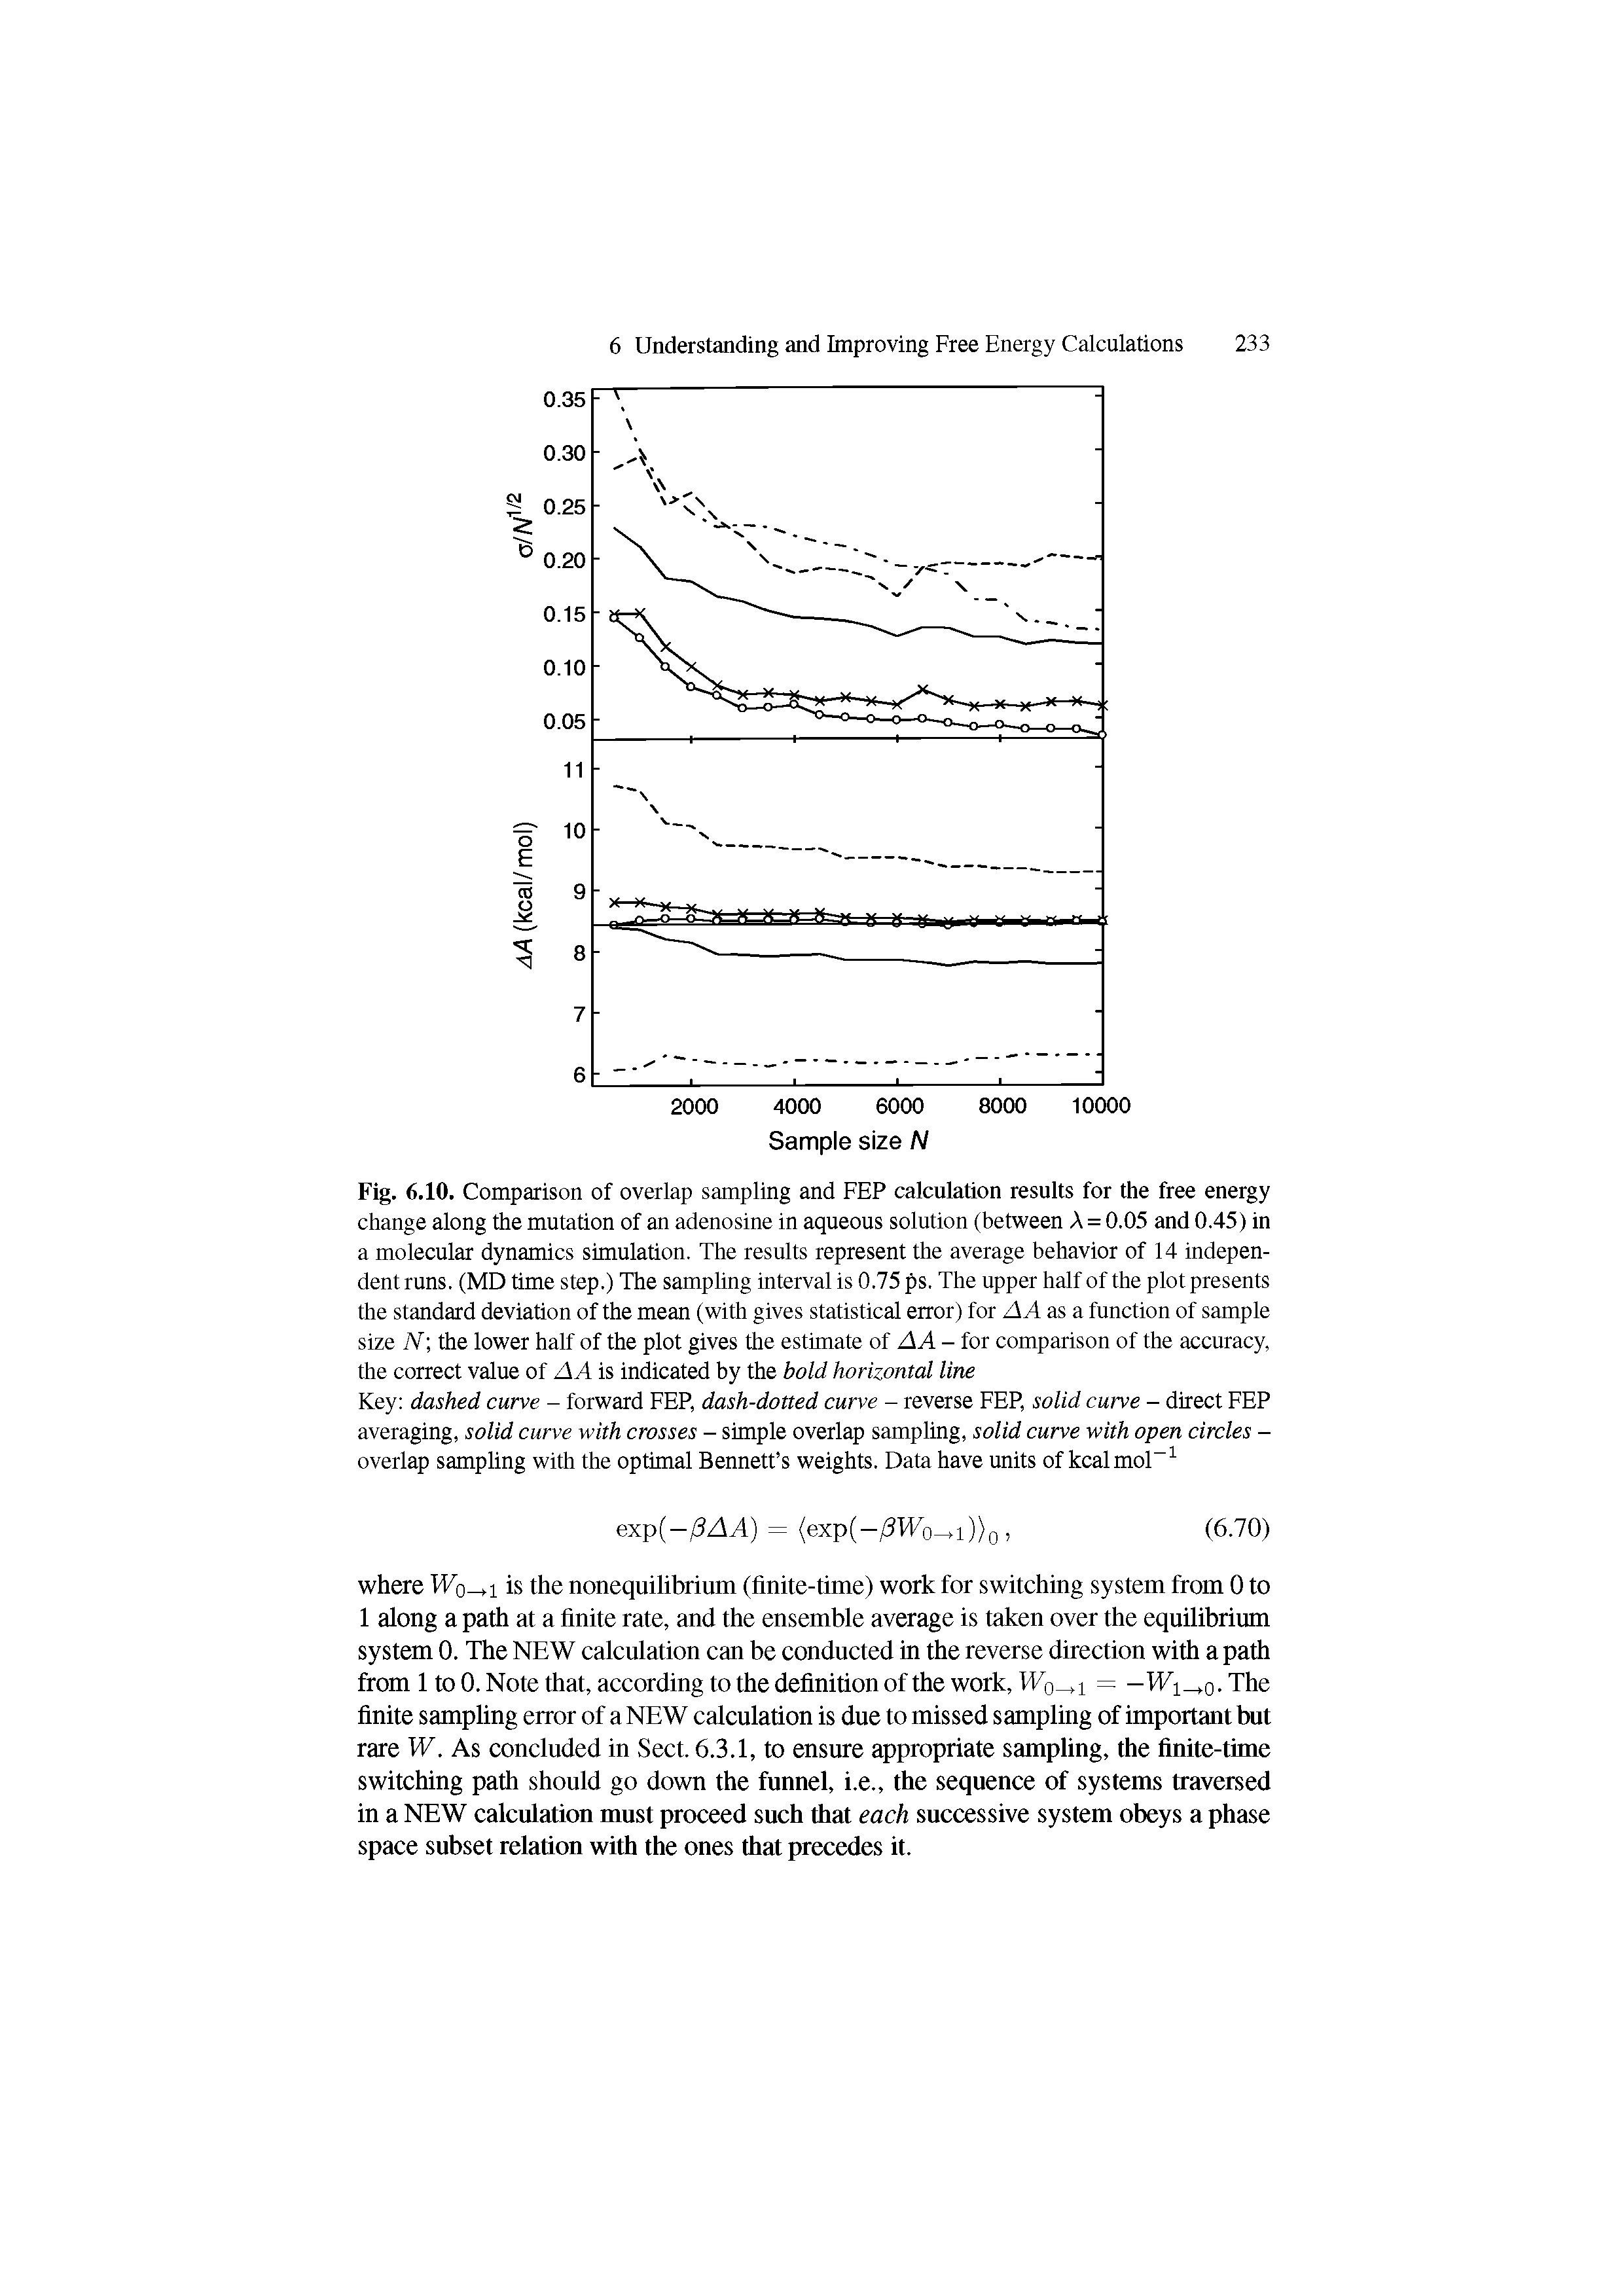 Fig. 6.10. Comparison of overlap sampling and FEP calculation results for the free energy change along the mutation of an adenosine in aqueous solution (between A = 0.05 and 0.45) in a molecular dynamics simulation. The results represent the average behavior of 14 independent runs. (MD time step.) The sampling interval is 0.75 ps. The upper half of the plot presents the standard deviation of the mean (with gives statistical error) for AA as a function of sample size N the lower half of the plot gives the estimate of A A - for comparison of the accuracy, the correct value of AA is indicated by the bold horizontal line...